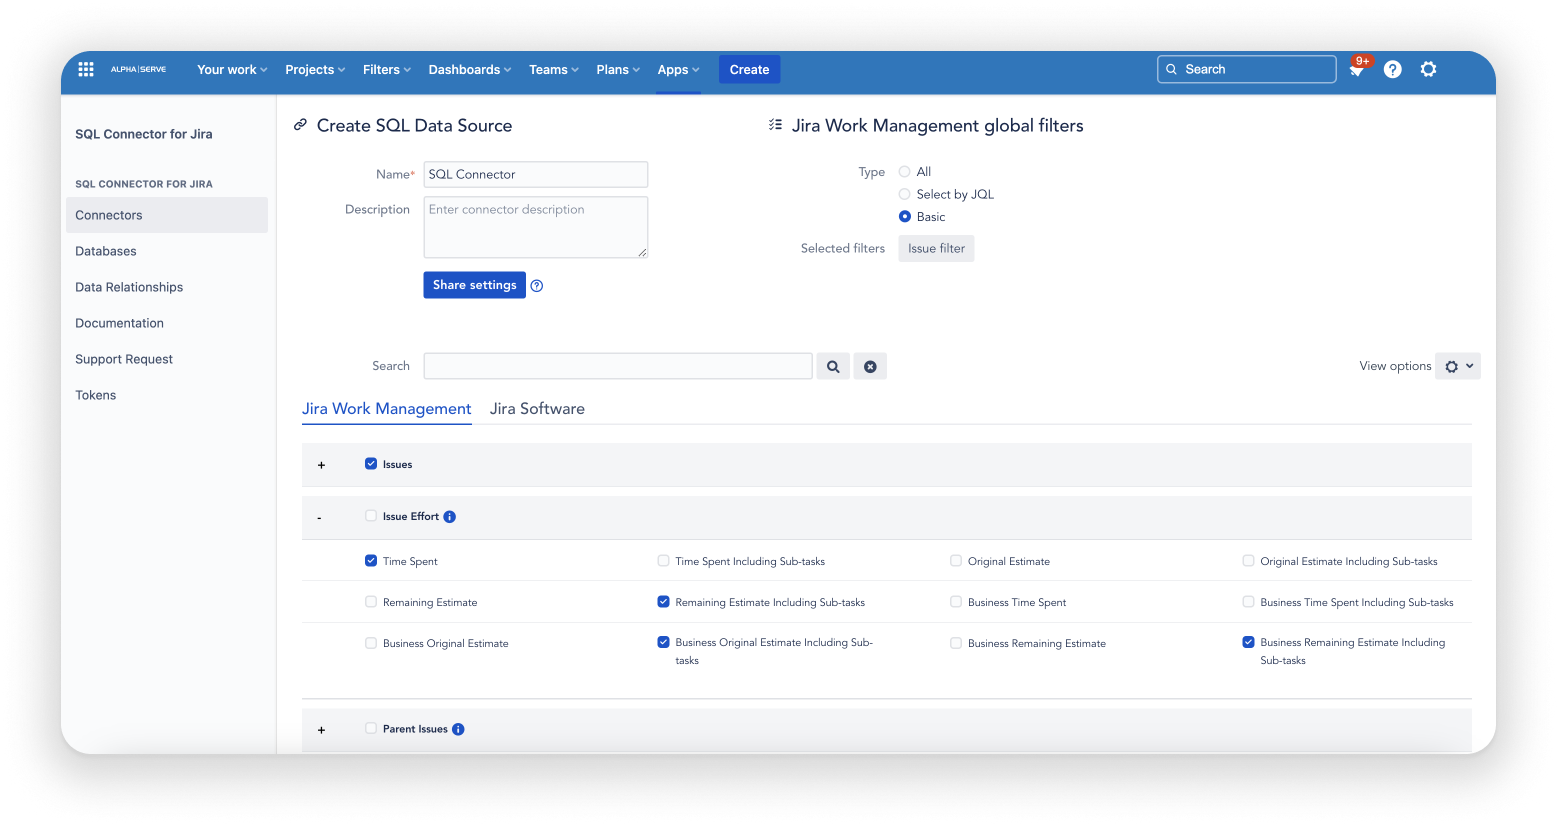 SQL Connector for Jira: Select Tables and Fields for Export